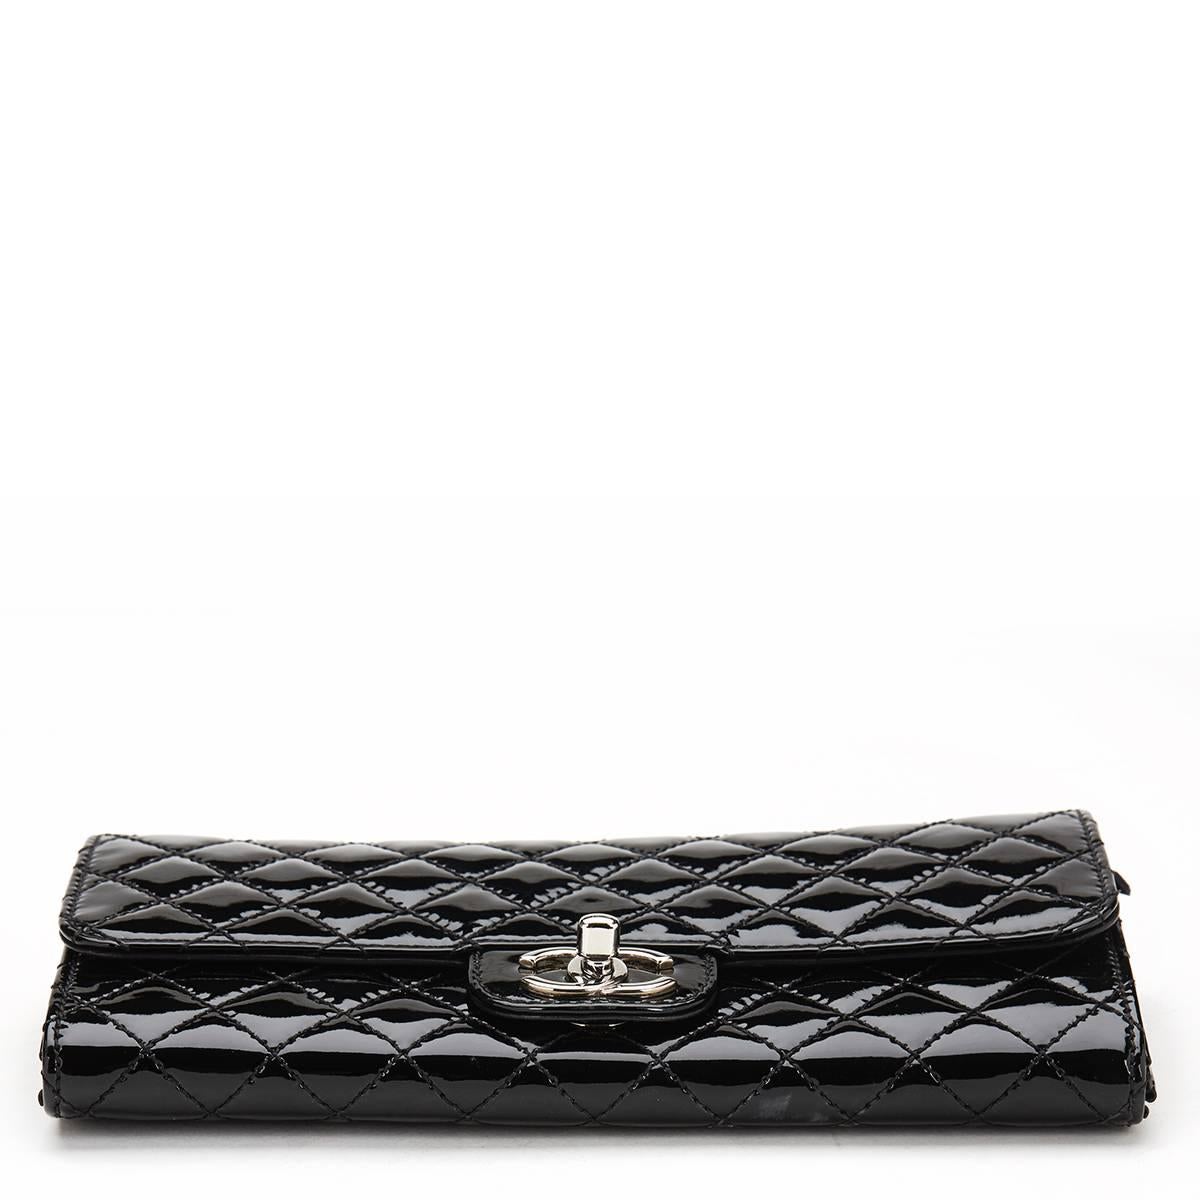 Women's 2014 Chanel Black Patent Leather Wallet-on-Chain WOC